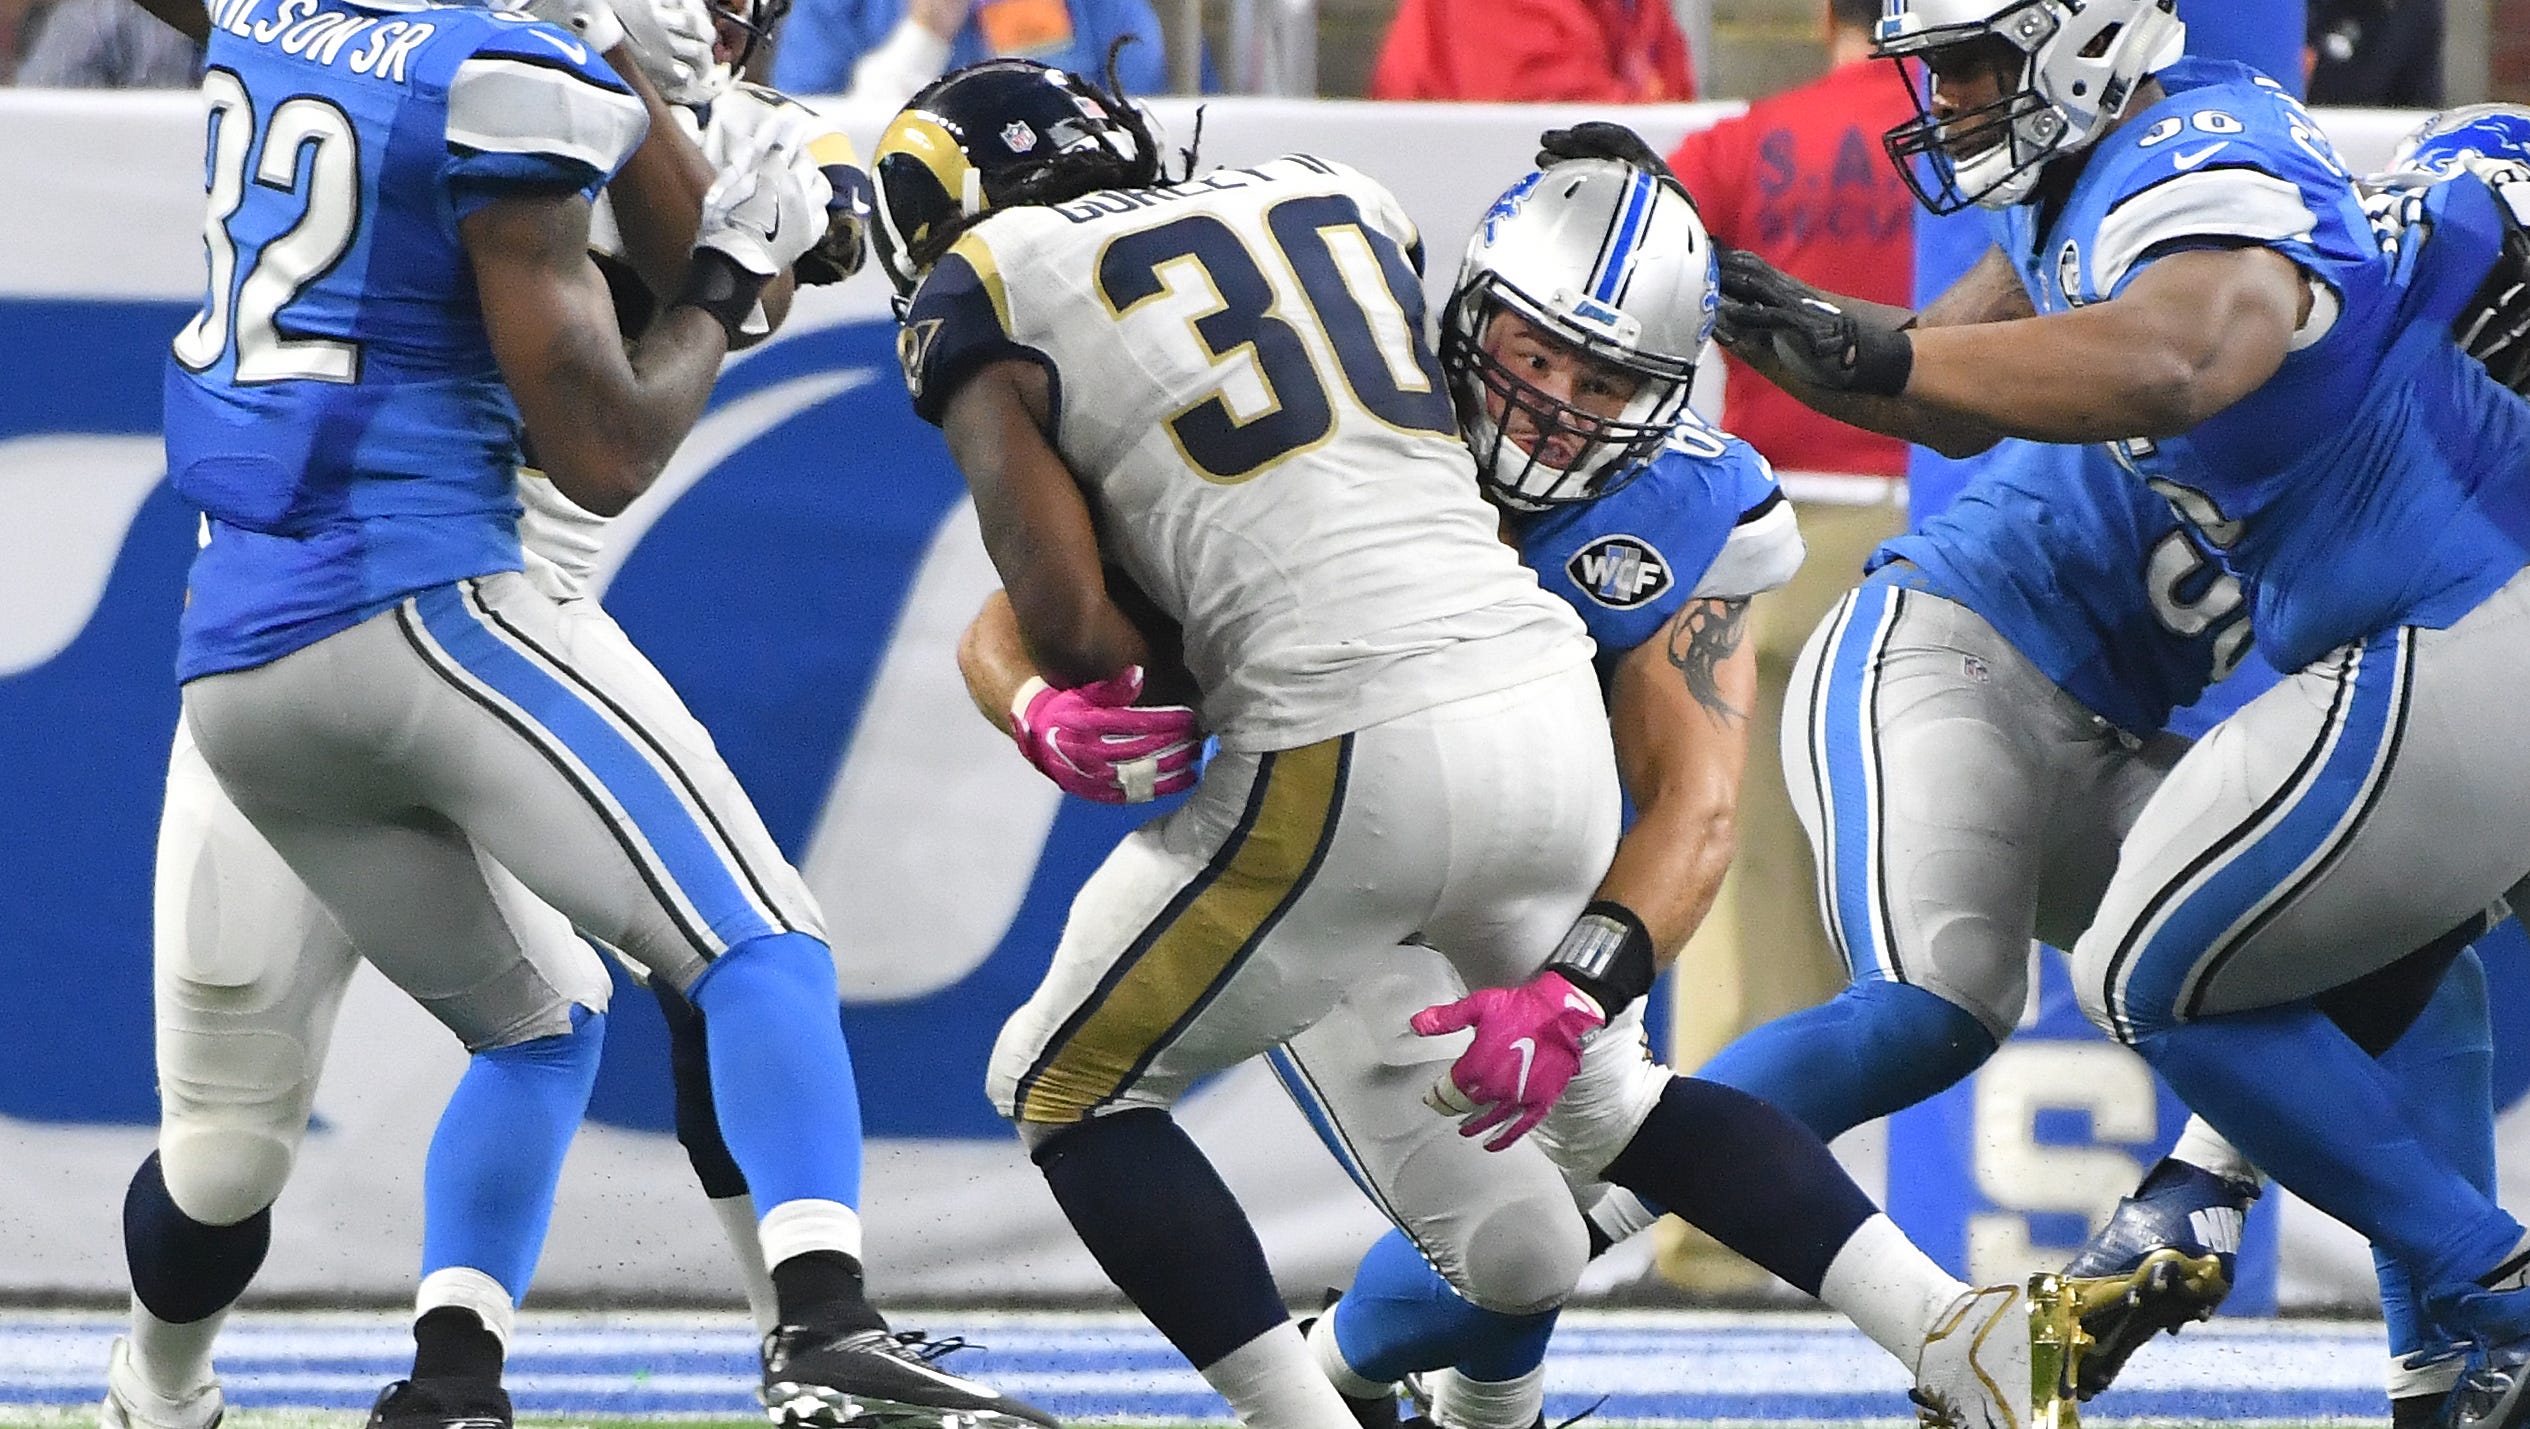 Lions Anthony Zettel picks up Rams running back Todd Gurley cutting through a hole and puts him down to the turf in the third quarter.